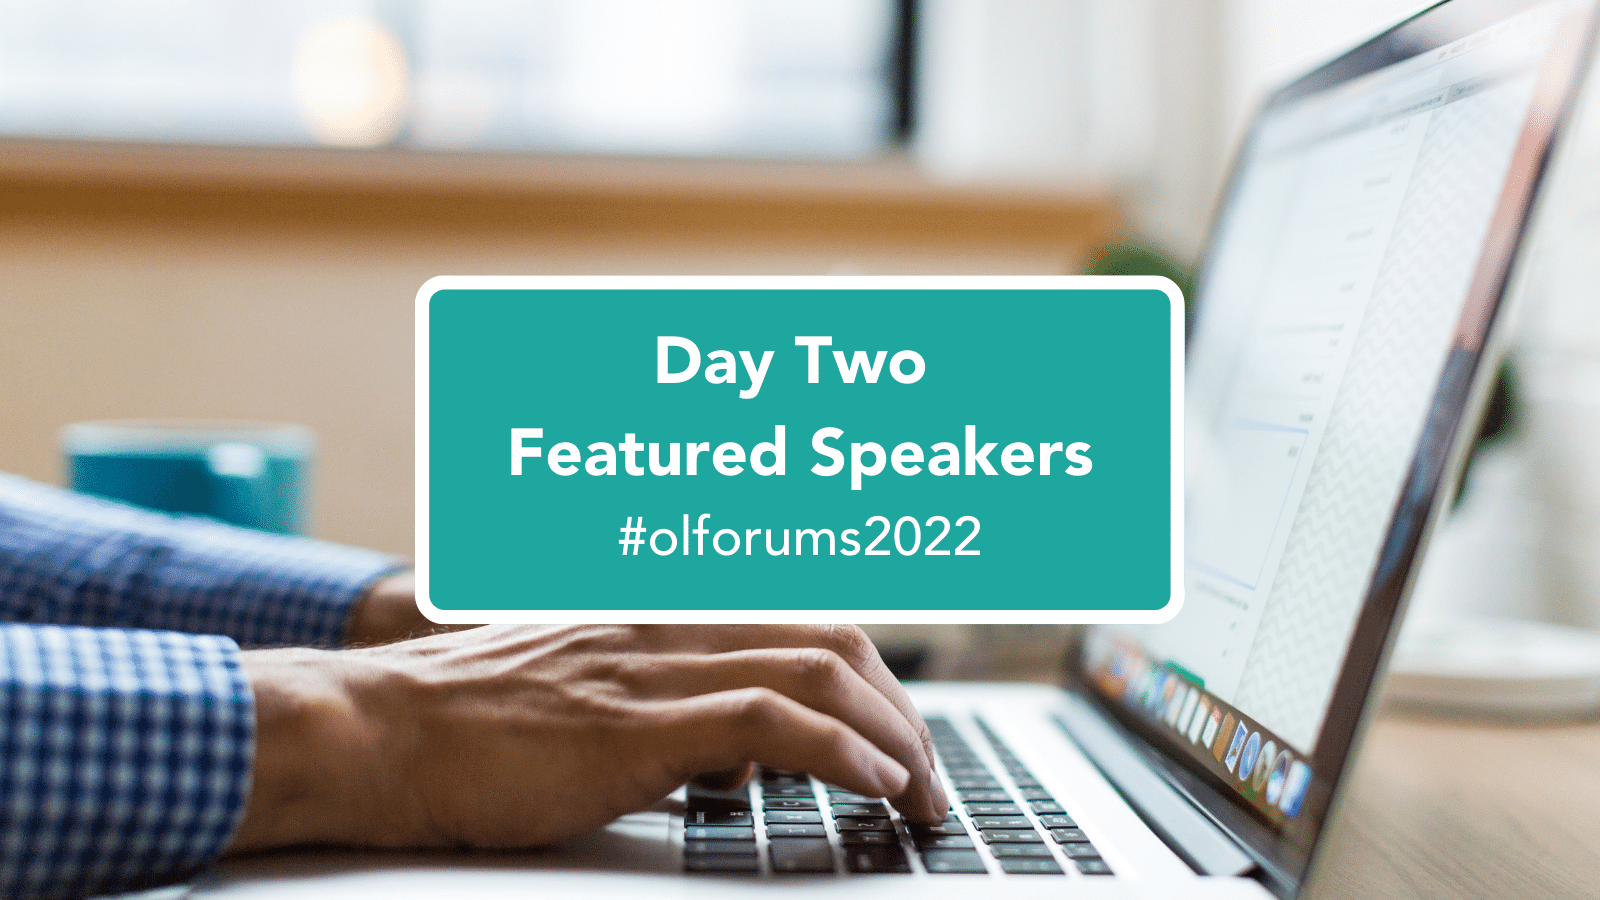 Featured Speakers at the Virtual #OLForums2022 [Day Two]